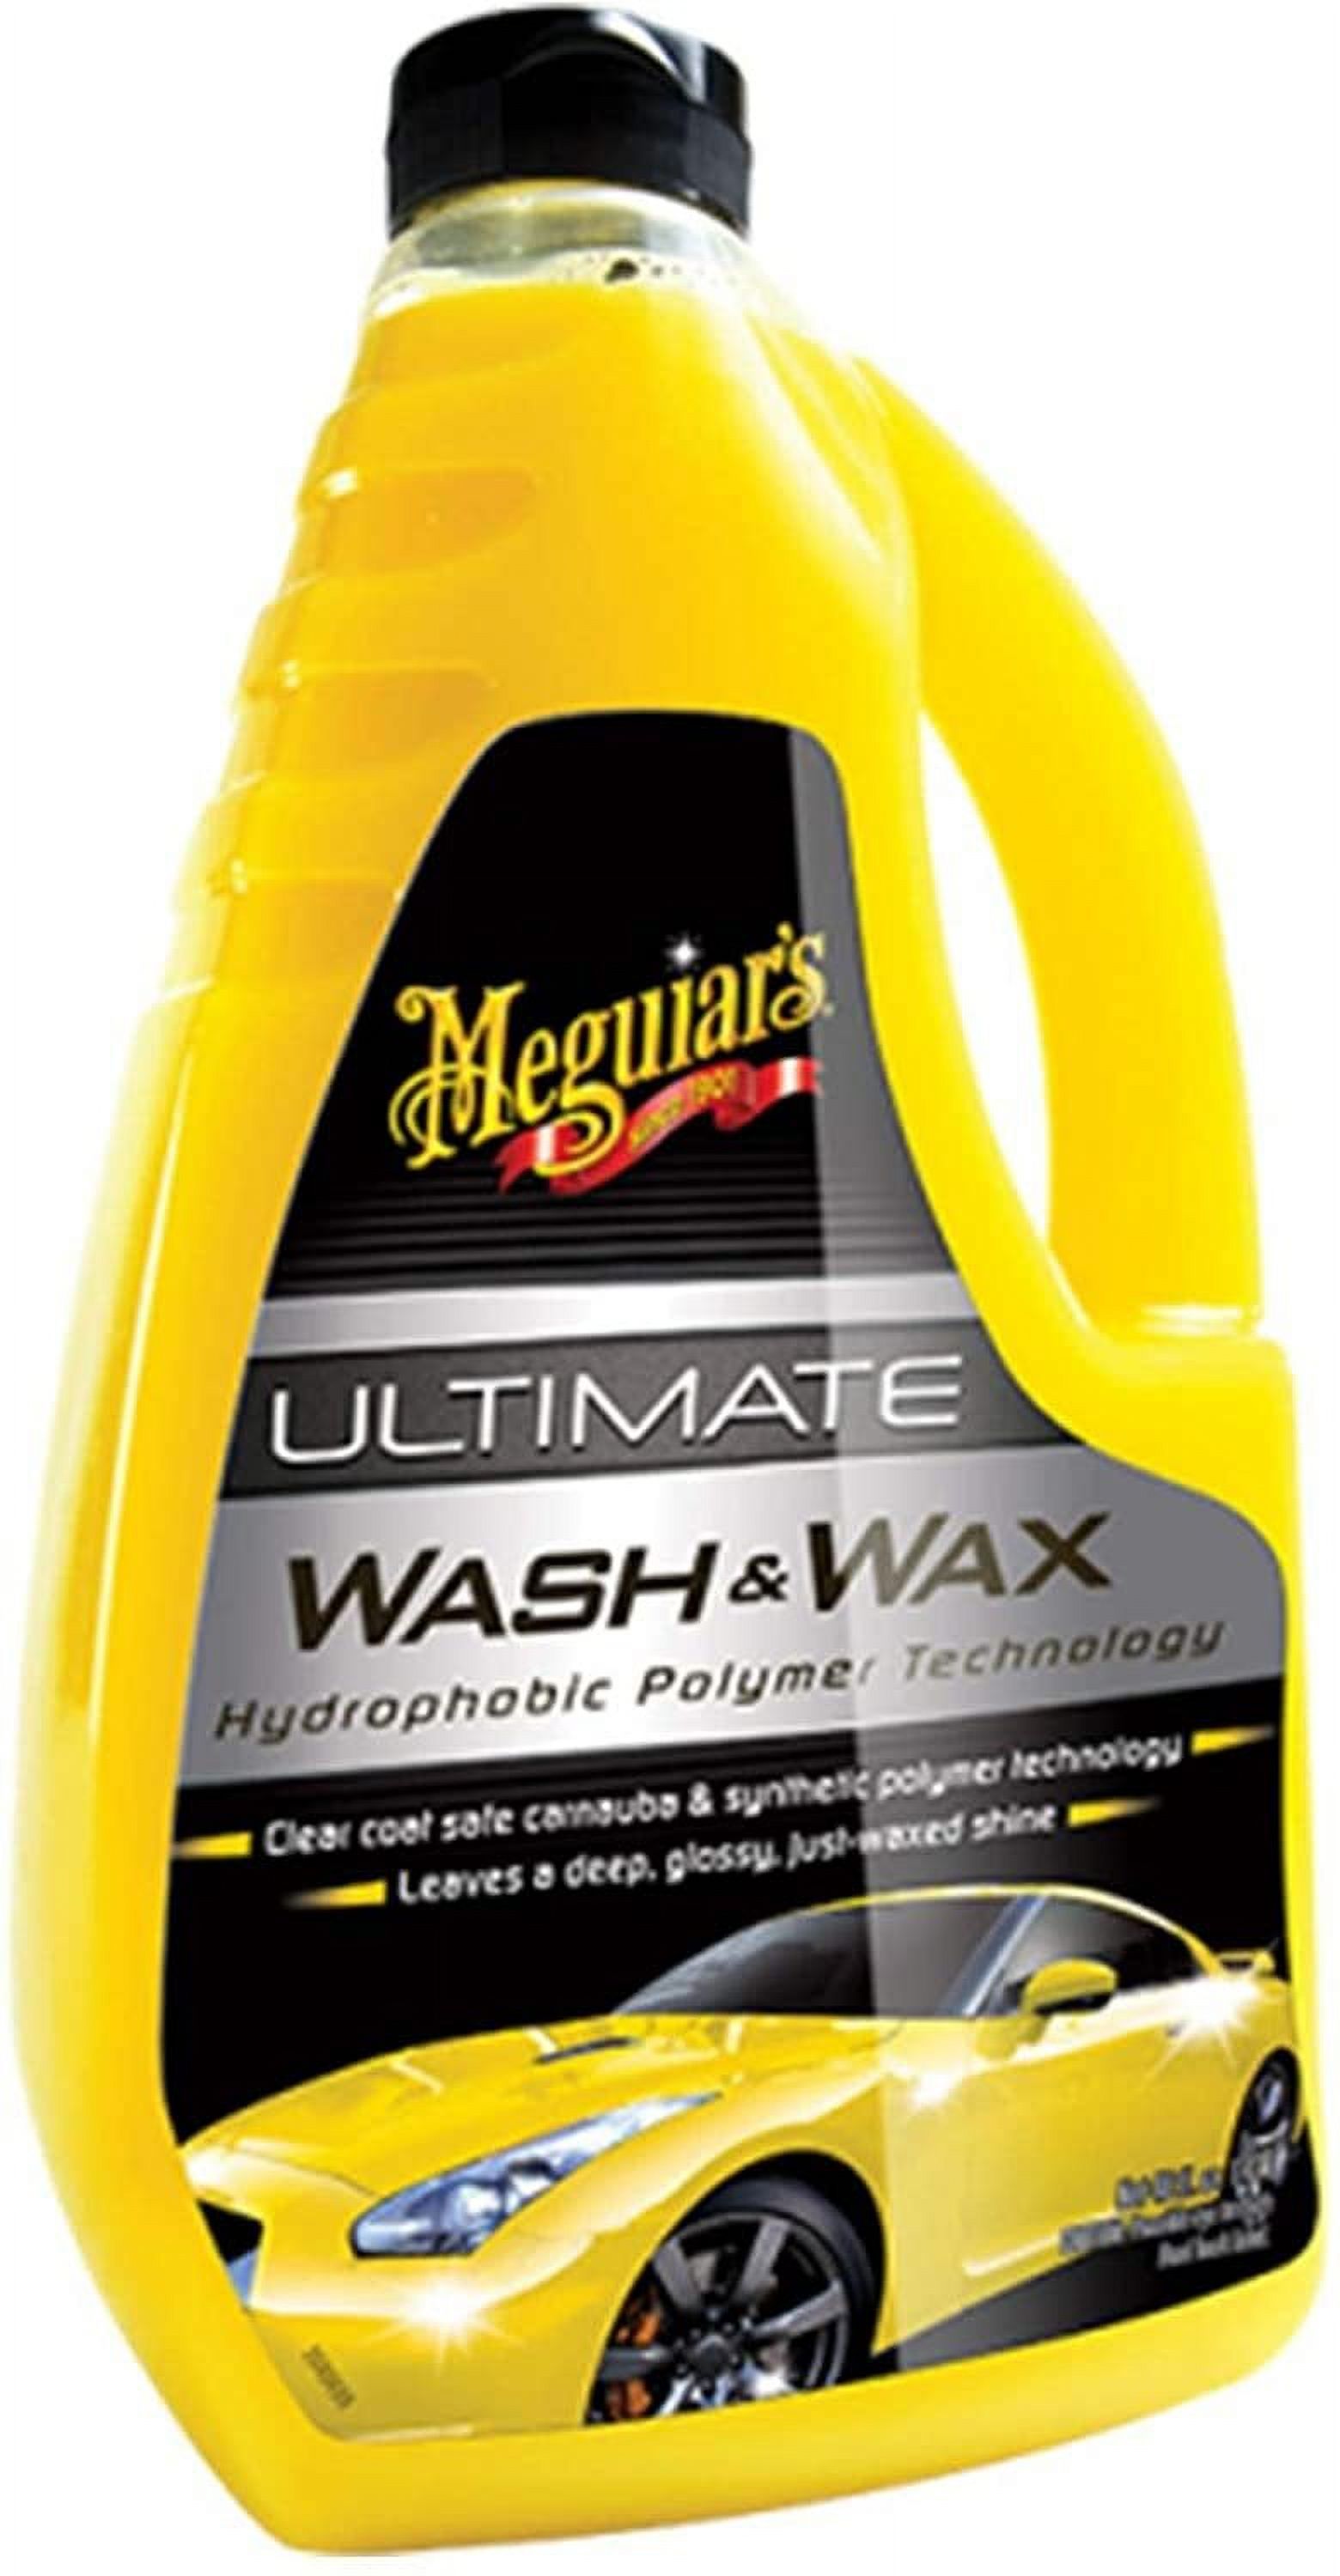 Meguiar's Ultimate Wash & Wax Car Care Cleaning Kit Solution, 48 Ounces (2 Pack) - image 2 of 2